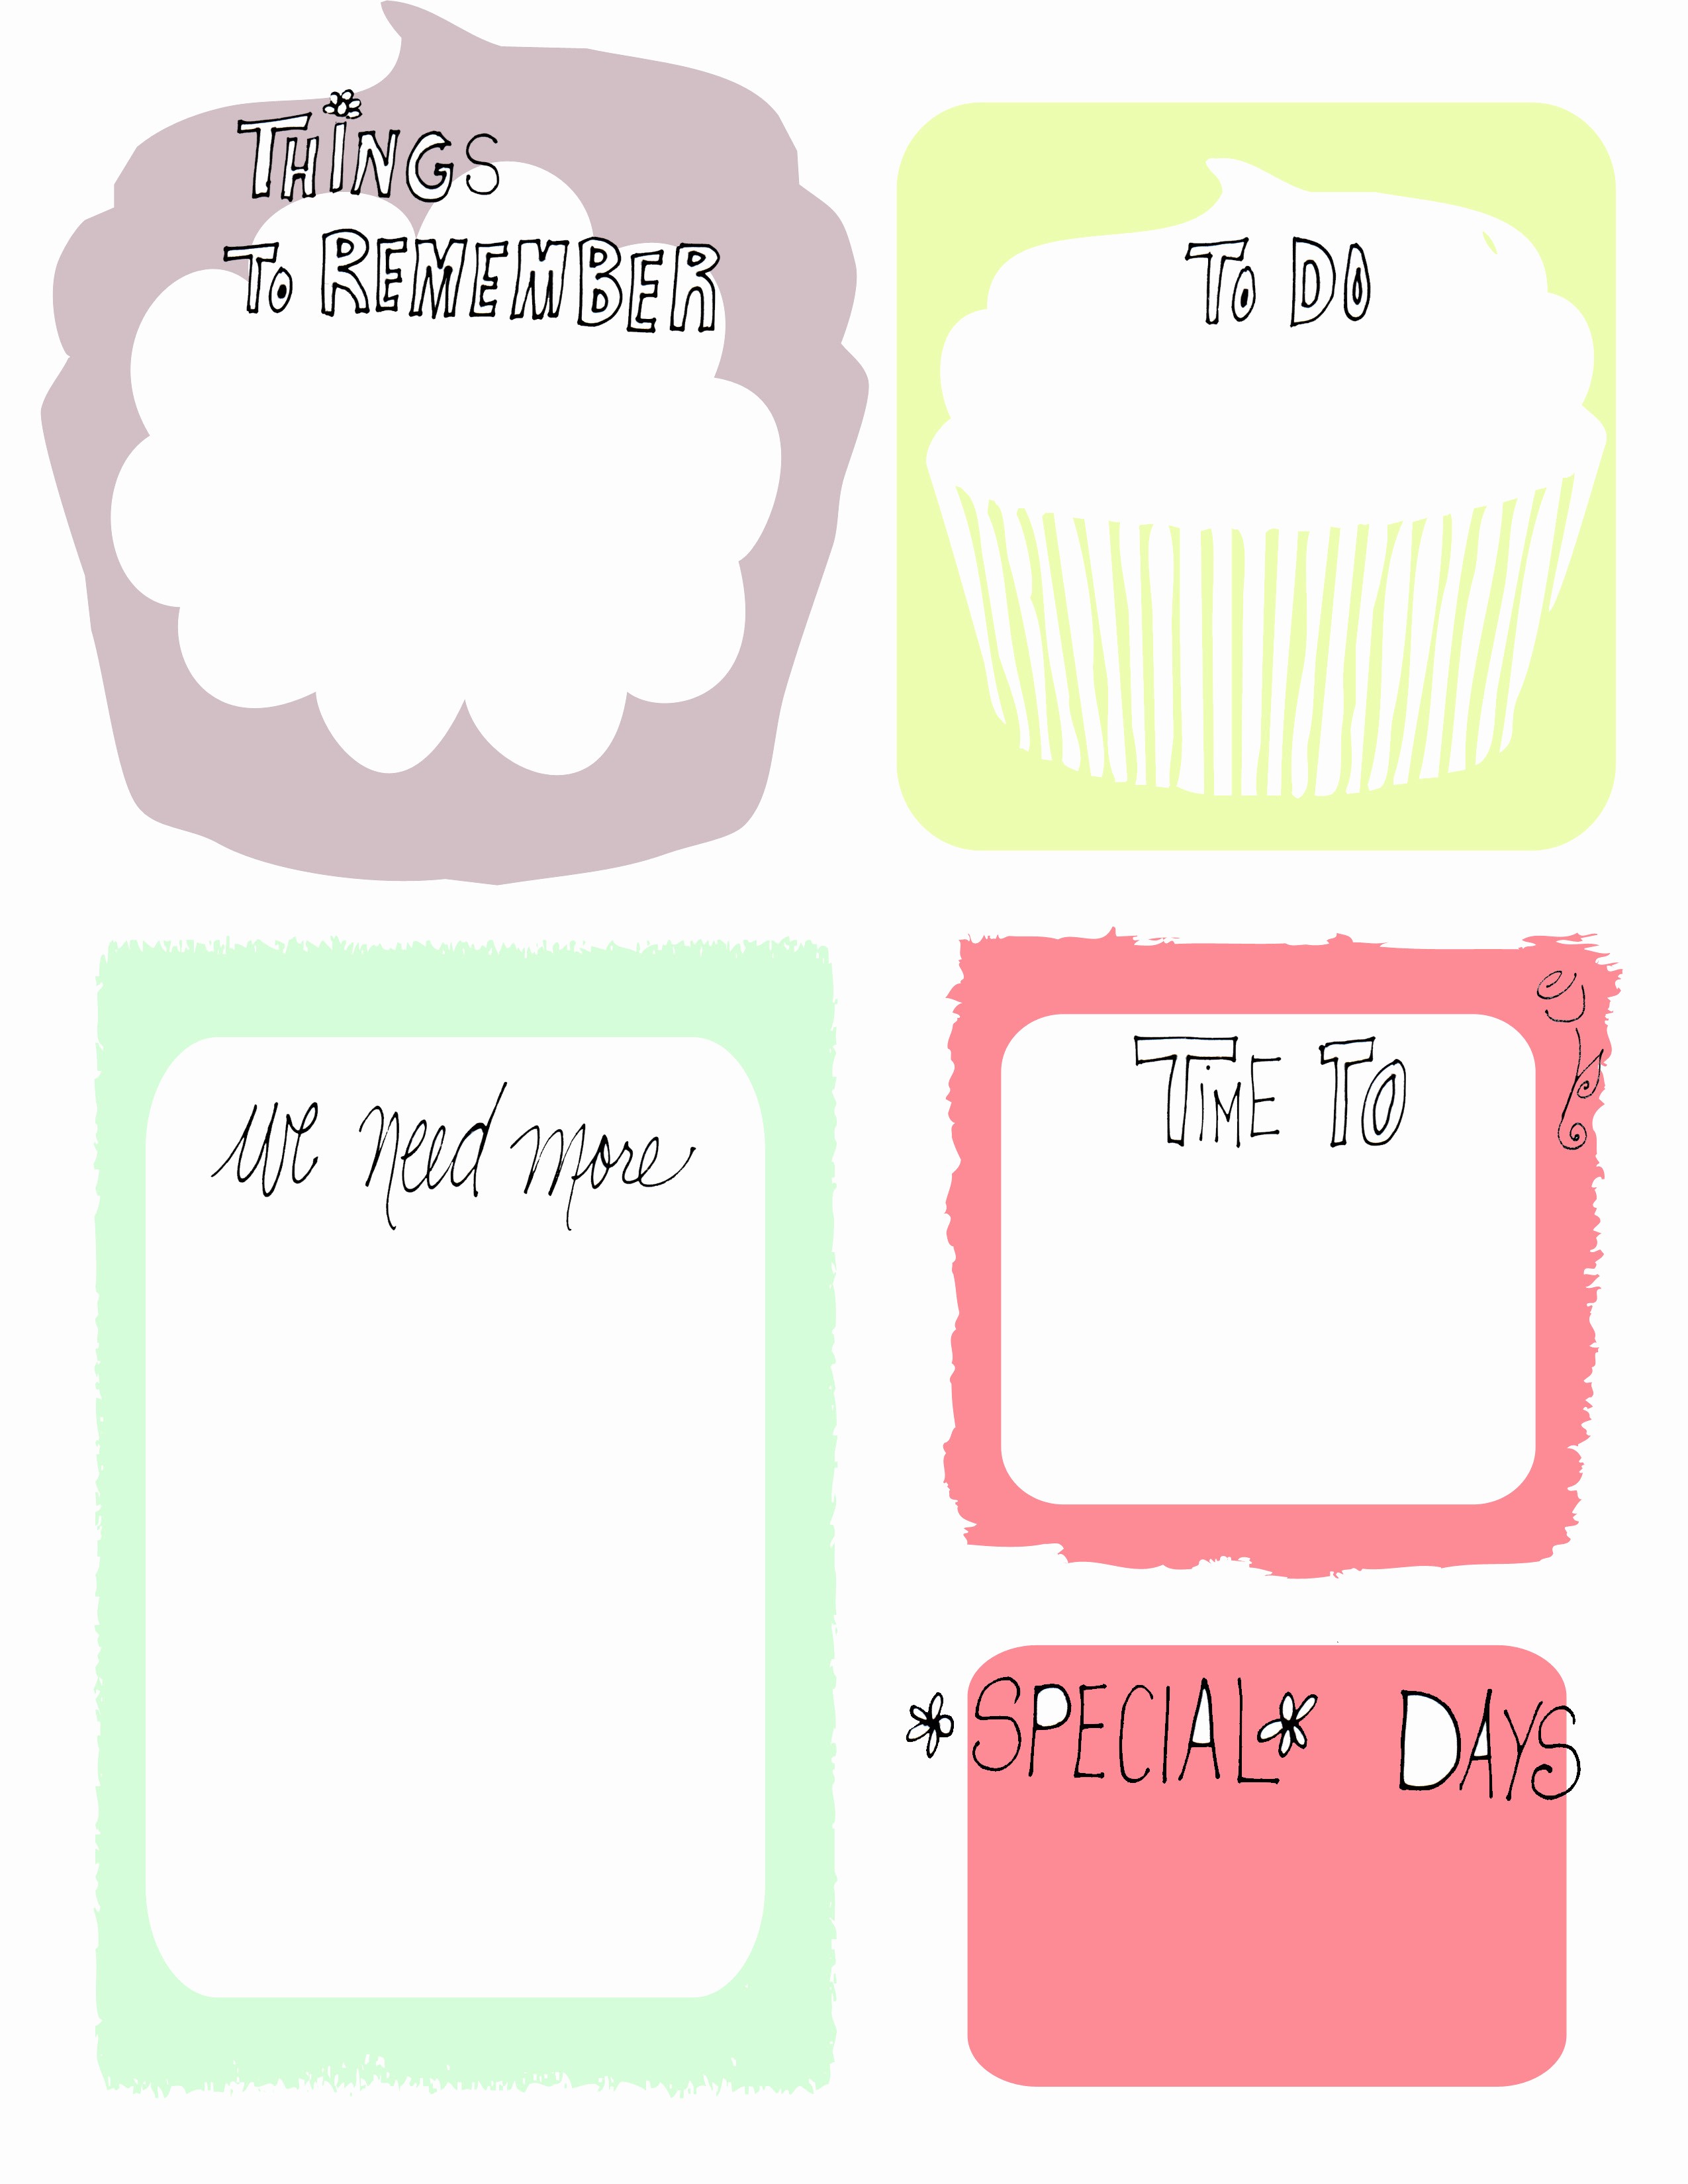 Things to Do List Printable Fresh Found This Awesome Cupcake to Do List Via Pintrest